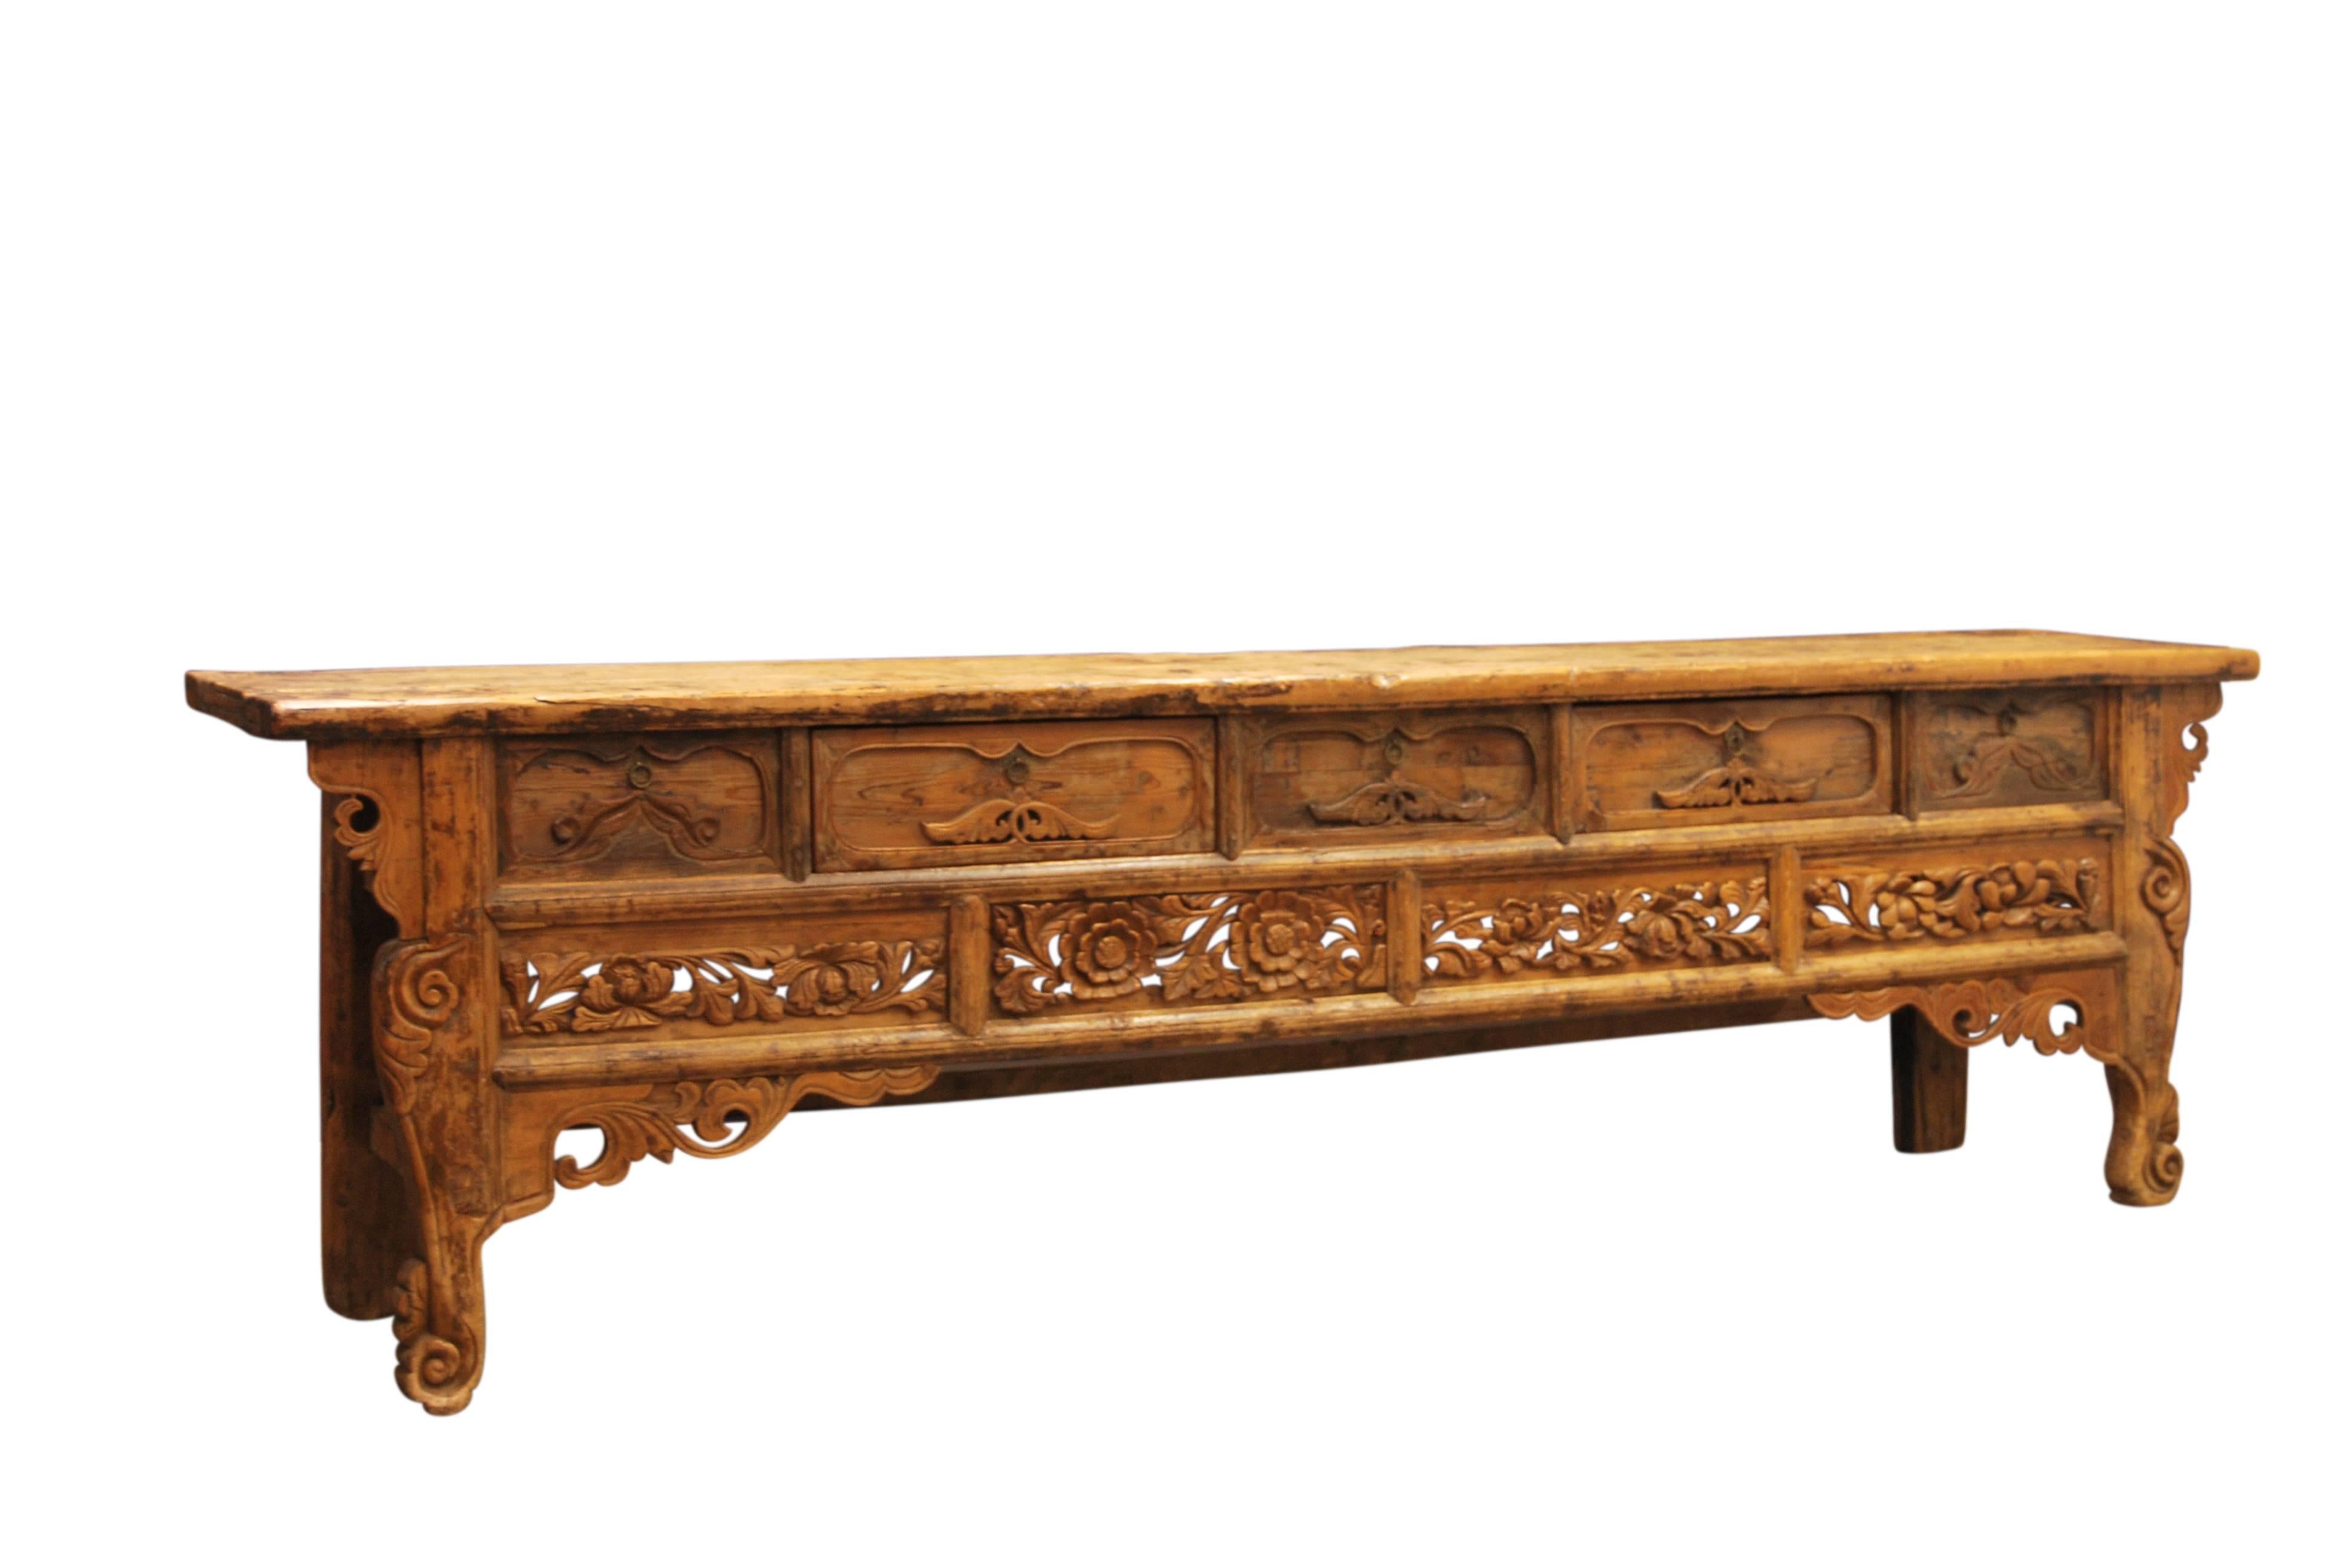 Rare Chinese Buddhist altar table made from bai-mu cypress wood with an elaborate, deeply carved and pierced relief. It also features a floral apron and scroll form feet,. The wood has been worn smooth over time and has a rich warm patina, which has